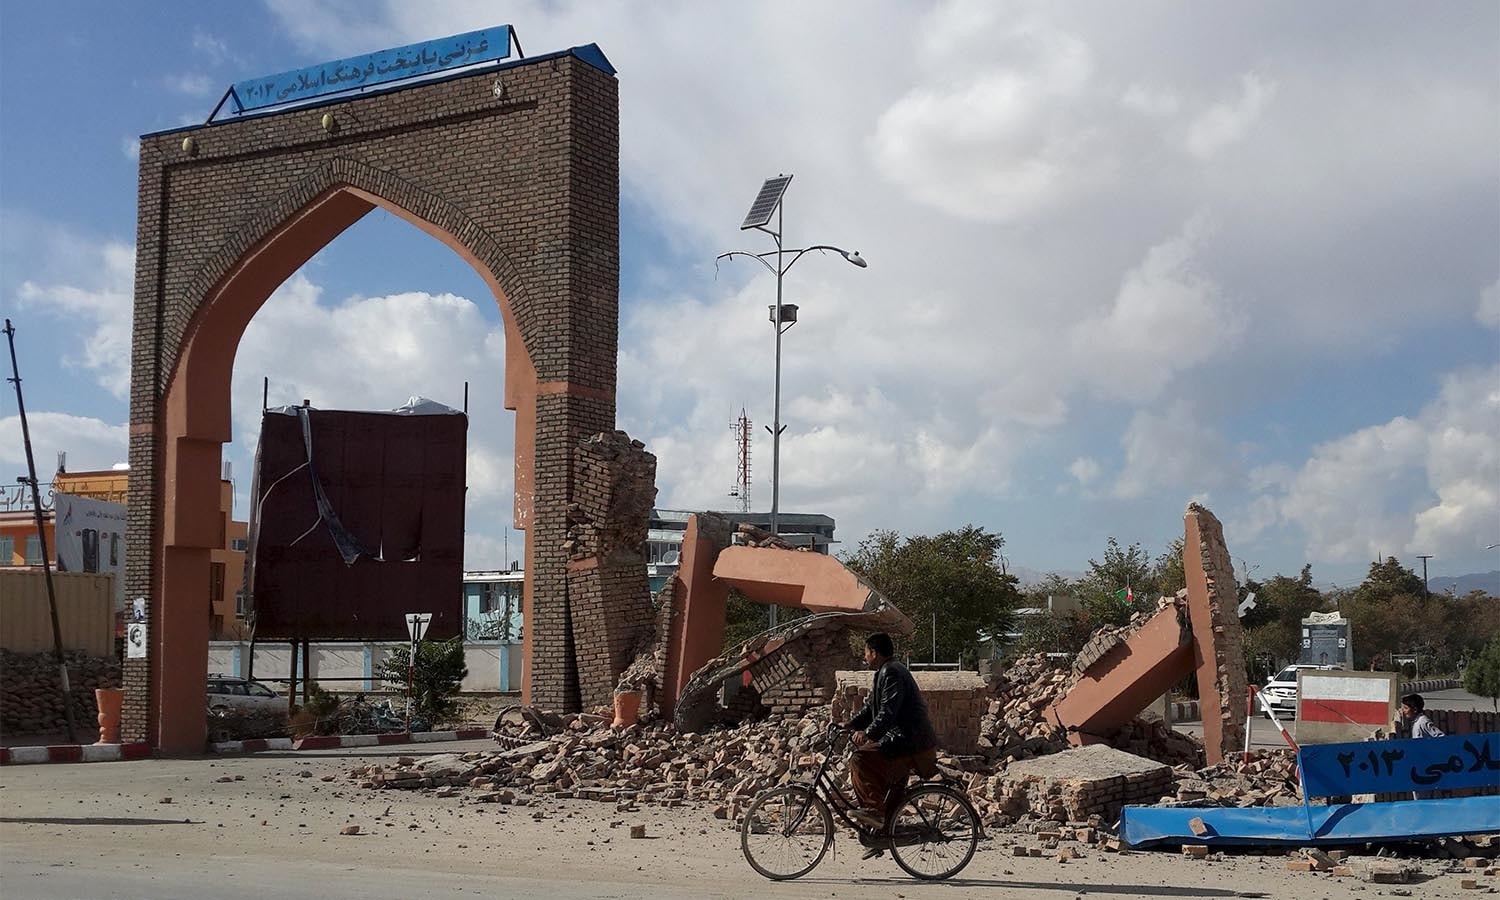 A man rides his bicycle next to damaged structures, after an earthquake in Ghazni, Afghanistan October 26, 2015. A powerful earthquake struck a remote area of northeastern Afghanistan on Monday, shaking the capital Kabul, as shockwaves were felt in northern India and in Pakistan's capital, where hundreds of people ran out of buildings as the ground rolled beneath them. REUTERS/Stringer  EDITORIAL USE ONLY. NO RESALES. NO ARCHIVE